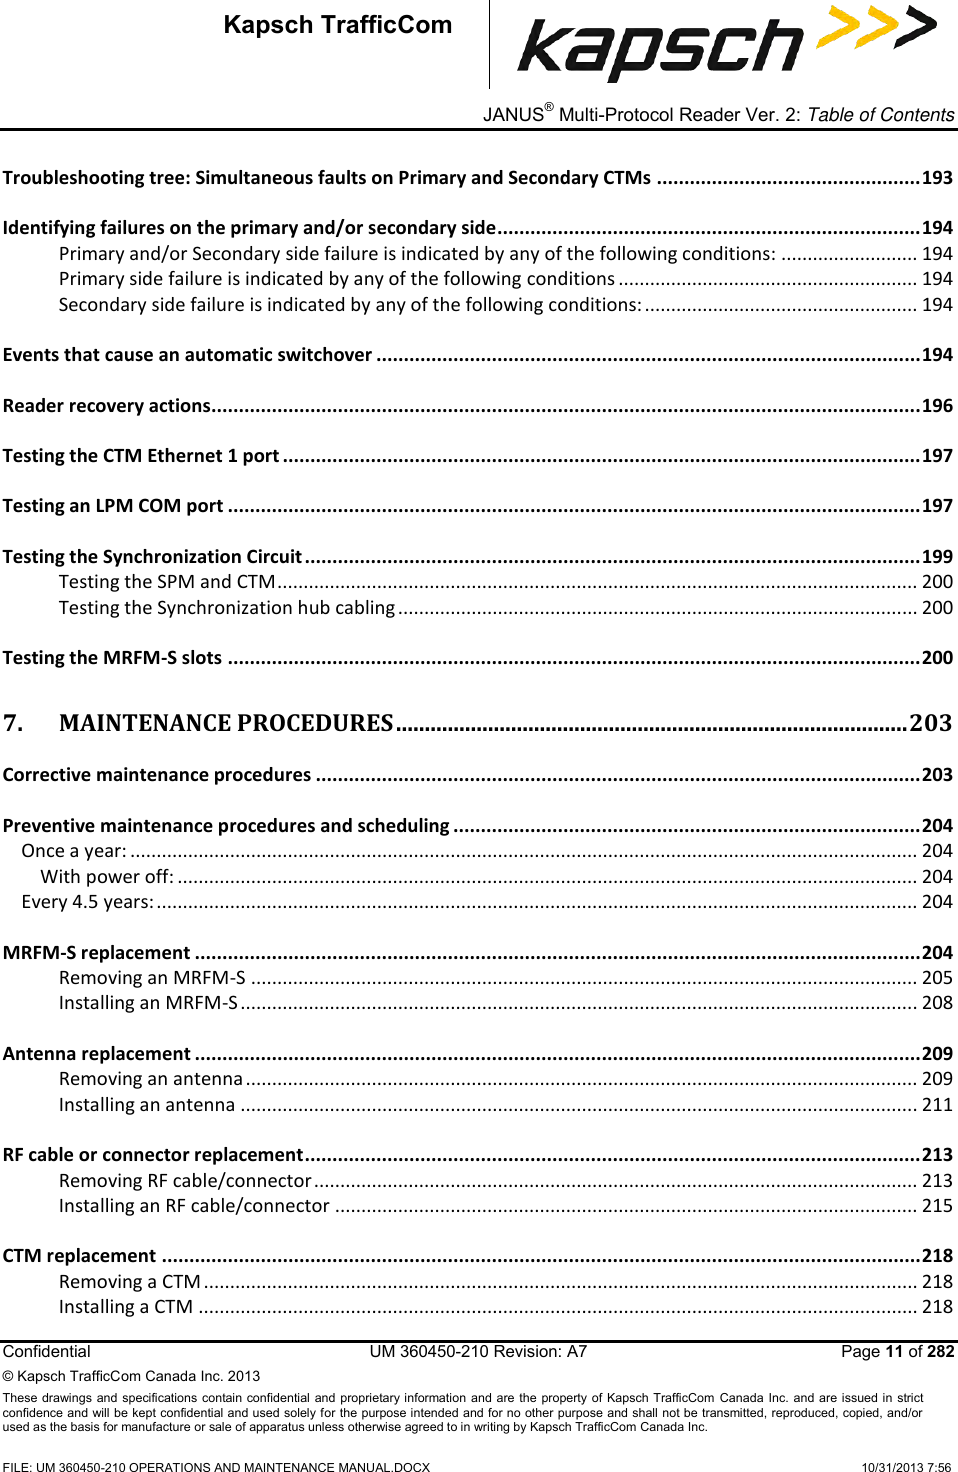 _ JANUS® Multi-Protocol Reader Ver. 2: Table of Contents   Confidential  UM 360450-210 Revision: A7   Page 11 of 282 © Kapsch TrafficCom Canada Inc. 2013 These  drawings and specifications contain confidential  and  proprietary information and are  the  property of Kapsch TrafficCom  Canada Inc.  and are issued in strict confidence and will be kept confidential and used solely for the purpose intended and for no other purpose and shall not be transmitted, reproduced, copied, and/or used as the basis for manufacture or sale of apparatus unless otherwise agreed to in writing by Kapsch TrafficCom Canada Inc.  FILE: UM 360450-210 OPERATIONS AND MAINTENANCE MANUAL.DOCX    10/31/2013 7:56  Kapsch TrafficCom Troubleshooting tree: Simultaneous faults on Primary and Secondary CTMs ................................................ 193 Identifying failures on the primary and/or secondary side ............................................................................. 194 Primary and/or Secondary side failure is indicated by any of the following conditions: .......................... 194 Primary side failure is indicated by any of the following conditions ......................................................... 194 Secondary side failure is indicated by any of the following conditions: .................................................... 194 Events that cause an automatic switchover ................................................................................................... 194 Reader recovery actions................................................................................................................................. 196 Testing the CTM Ethernet 1 port .................................................................................................................... 197 Testing an LPM COM port .............................................................................................................................. 197 Testing the Synchronization Circuit ................................................................................................................ 199 Testing the SPM and CTM .......................................................................................................................... 200 Testing the Synchronization hub cabling ................................................................................................... 200 Testing the MRFM-S slots .............................................................................................................................. 200 7. MAINTENANCE PROCEDURES ......................................................................................... 203 Corrective maintenance procedures .............................................................................................................. 203 Preventive maintenance procedures and scheduling ..................................................................................... 204 Once a year: ...................................................................................................................................................... 204 With power off: ............................................................................................................................................. 204 Every 4.5 years: ................................................................................................................................................. 204 MRFM-S replacement .................................................................................................................................... 204 Removing an MRFM-S ............................................................................................................................... 205 Installing an MRFM-S ................................................................................................................................. 208 Antenna replacement .................................................................................................................................... 209 Removing an antenna ................................................................................................................................ 209 Installing an antenna ................................................................................................................................. 211 RF cable or connector replacement ................................................................................................................ 213 Removing RF cable/connector ................................................................................................................... 213 Installing an RF cable/connector ............................................................................................................... 215 CTM replacement .......................................................................................................................................... 218 Removing a CTM ........................................................................................................................................ 218 Installing a CTM ......................................................................................................................................... 218 